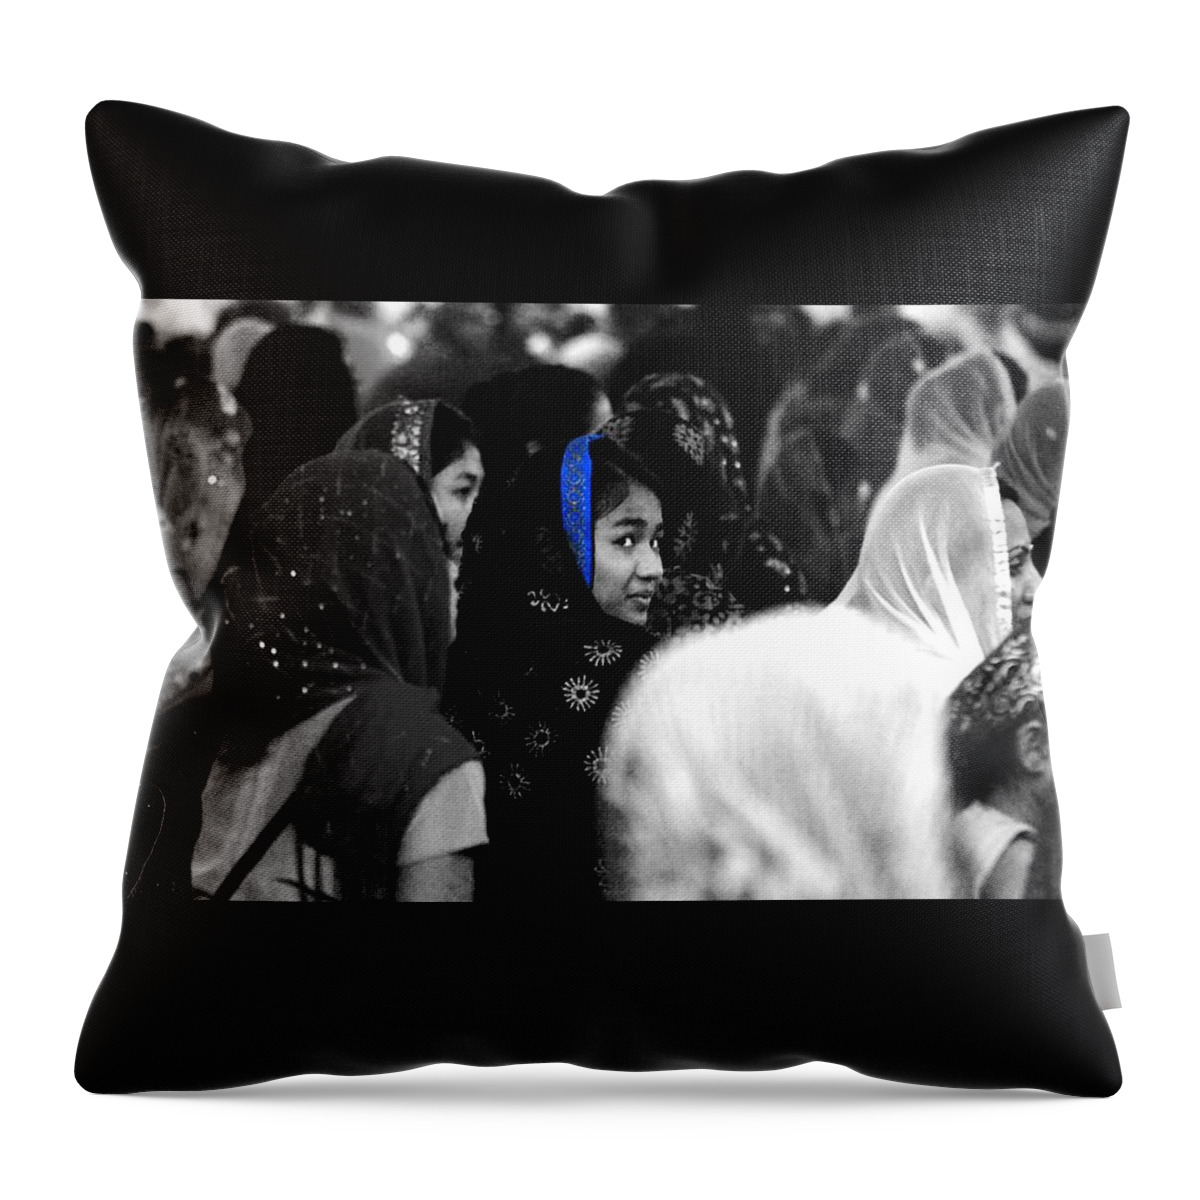 Indian Throw Pillow featuring the photograph Indian Sikh Woman by Sumit Mehndiratta